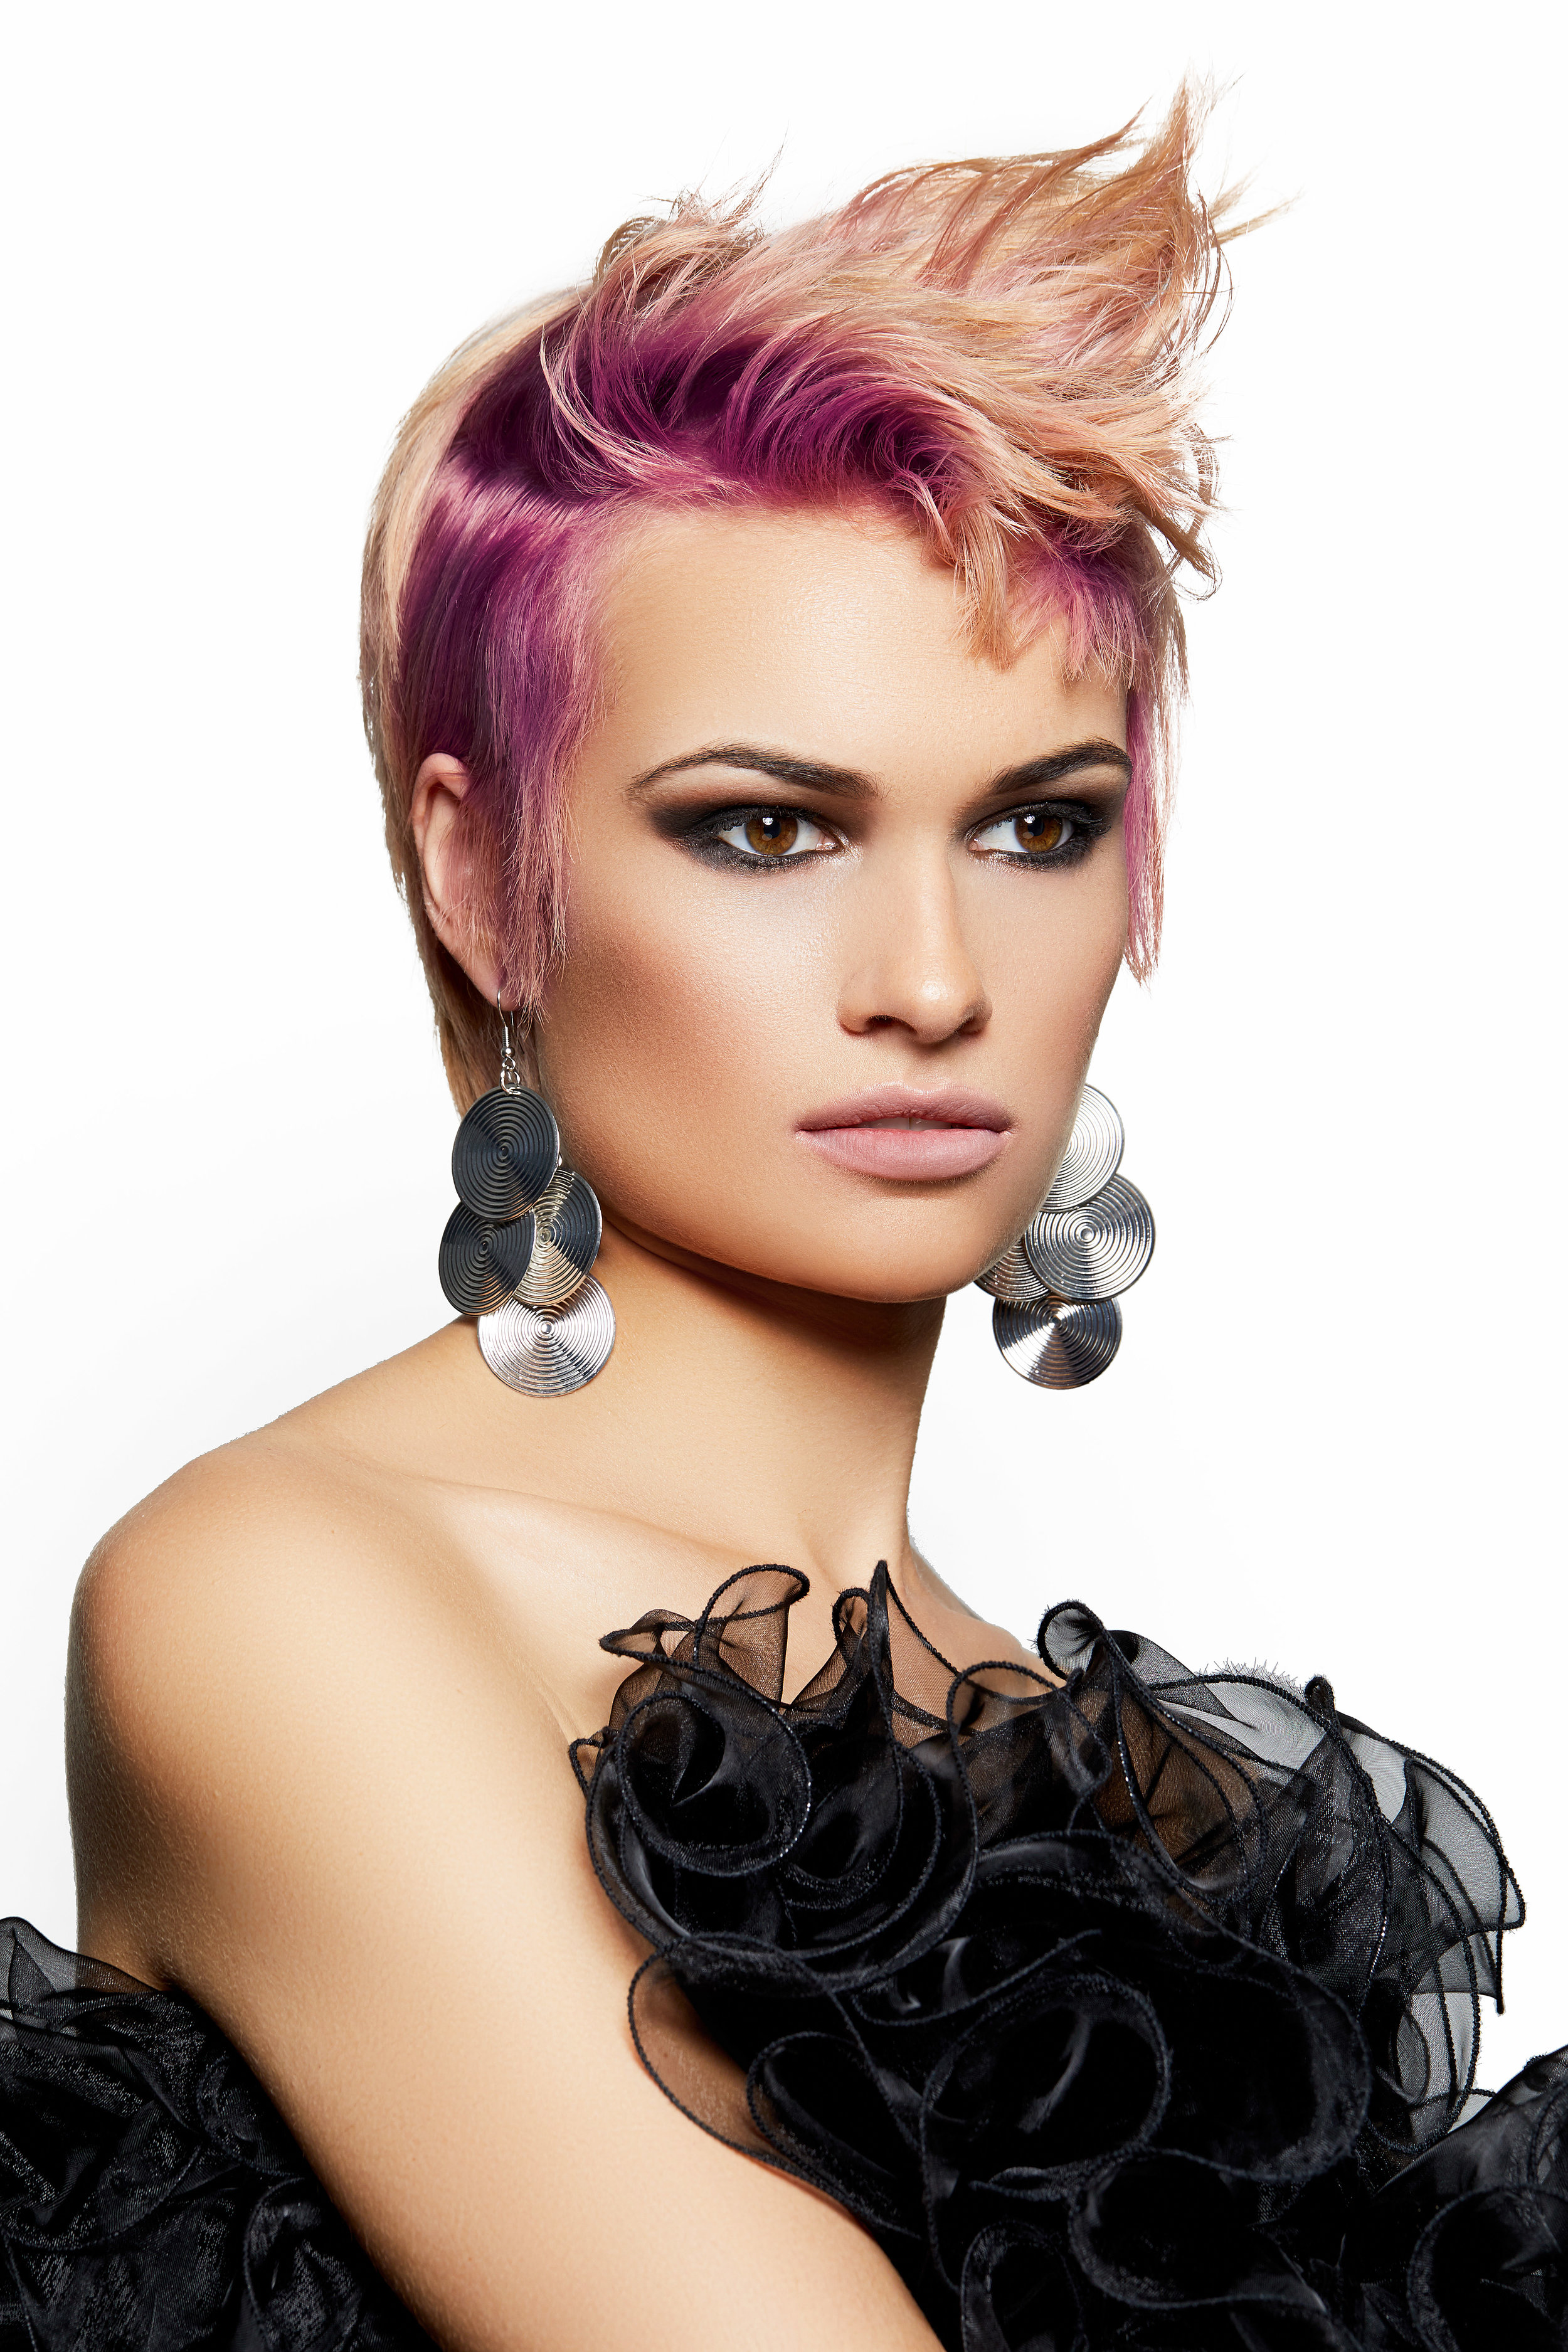 PEOPLE'S CHOICE WINNER Anthony Bayer from Anthony Bayer Hair (C10).jpg